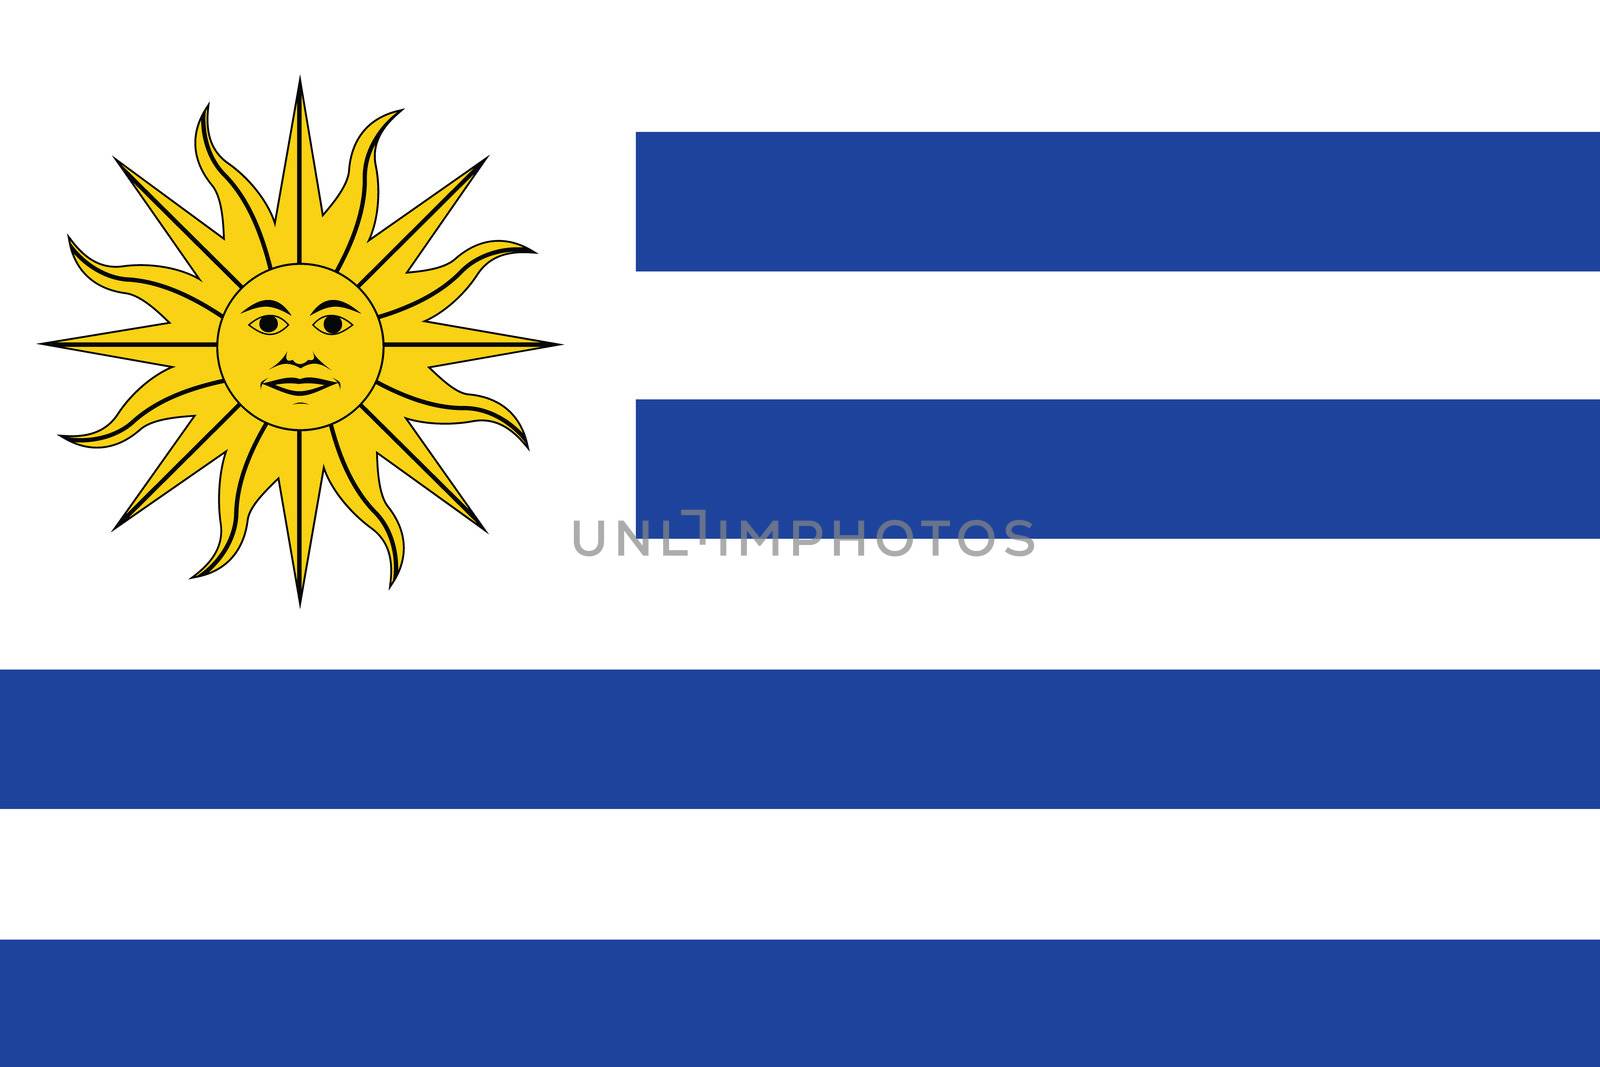 An Illustrated Drawing of the flag of Uruguay